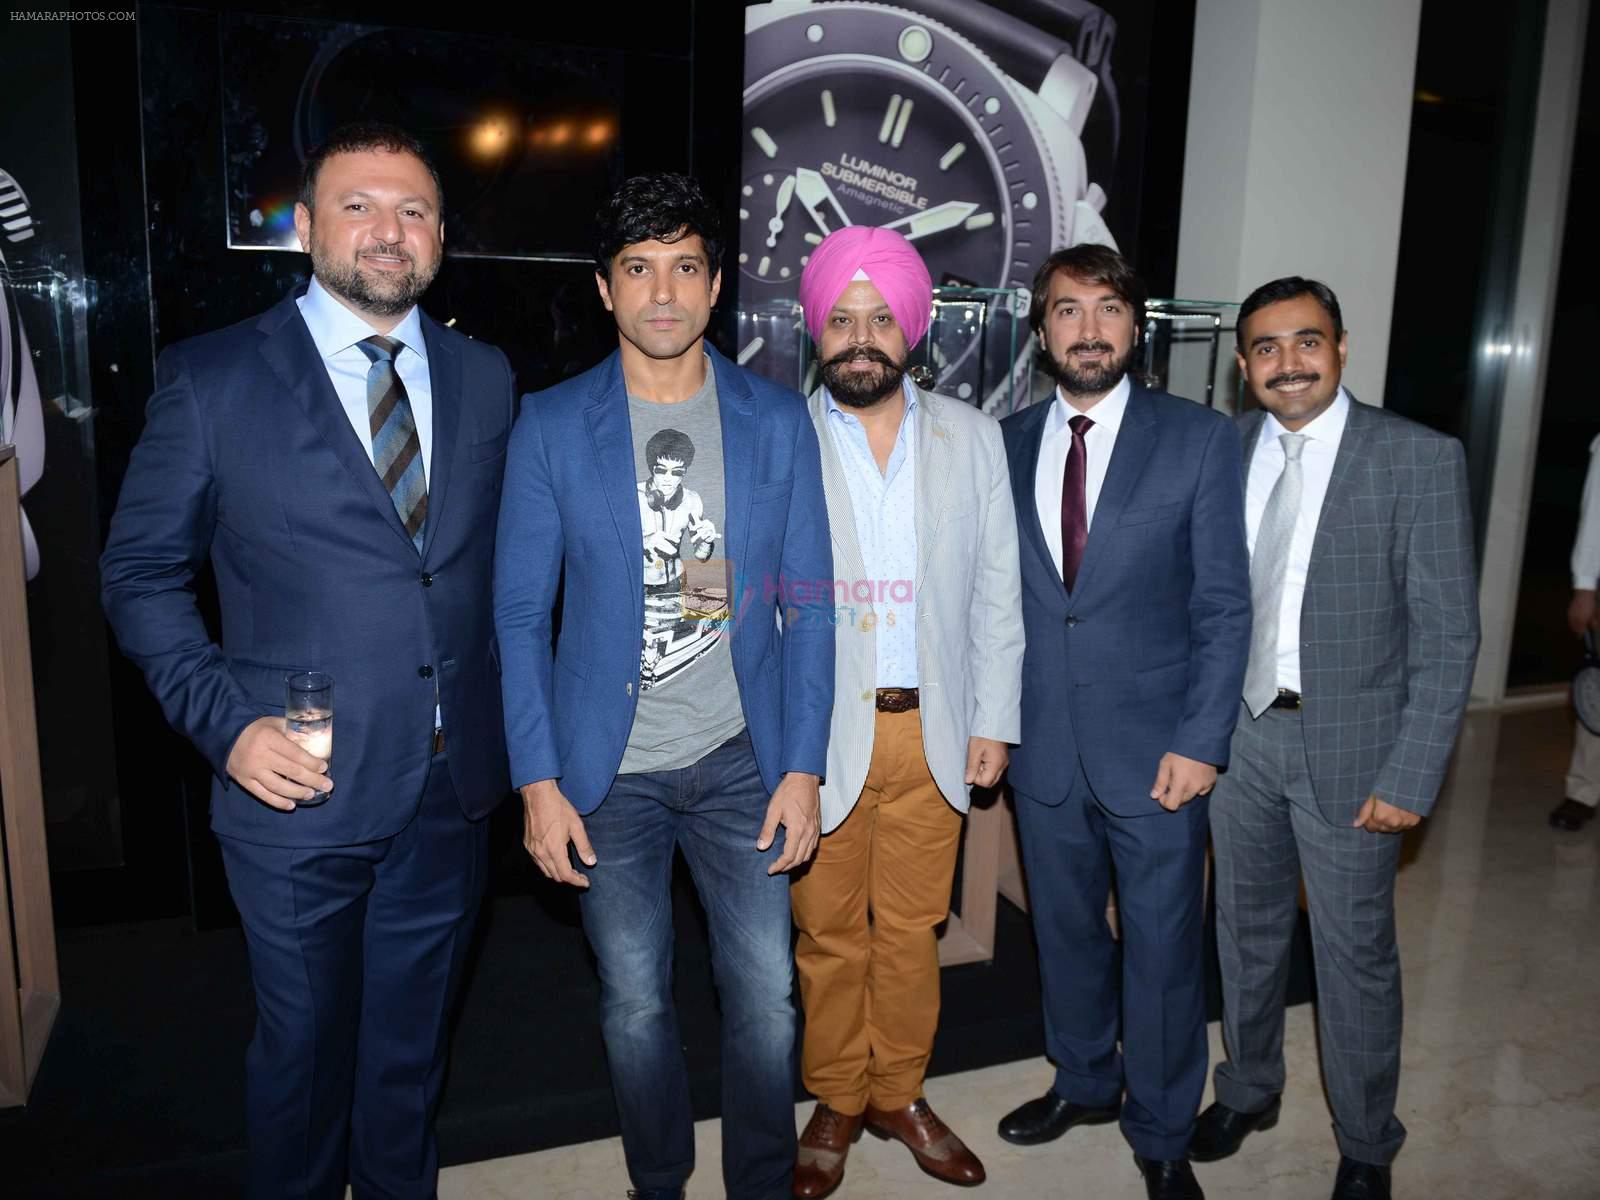 Farhan Akhtar at GQ THE 50 Most Influential Young Indians event in Gurgaon on 3rd July 2015